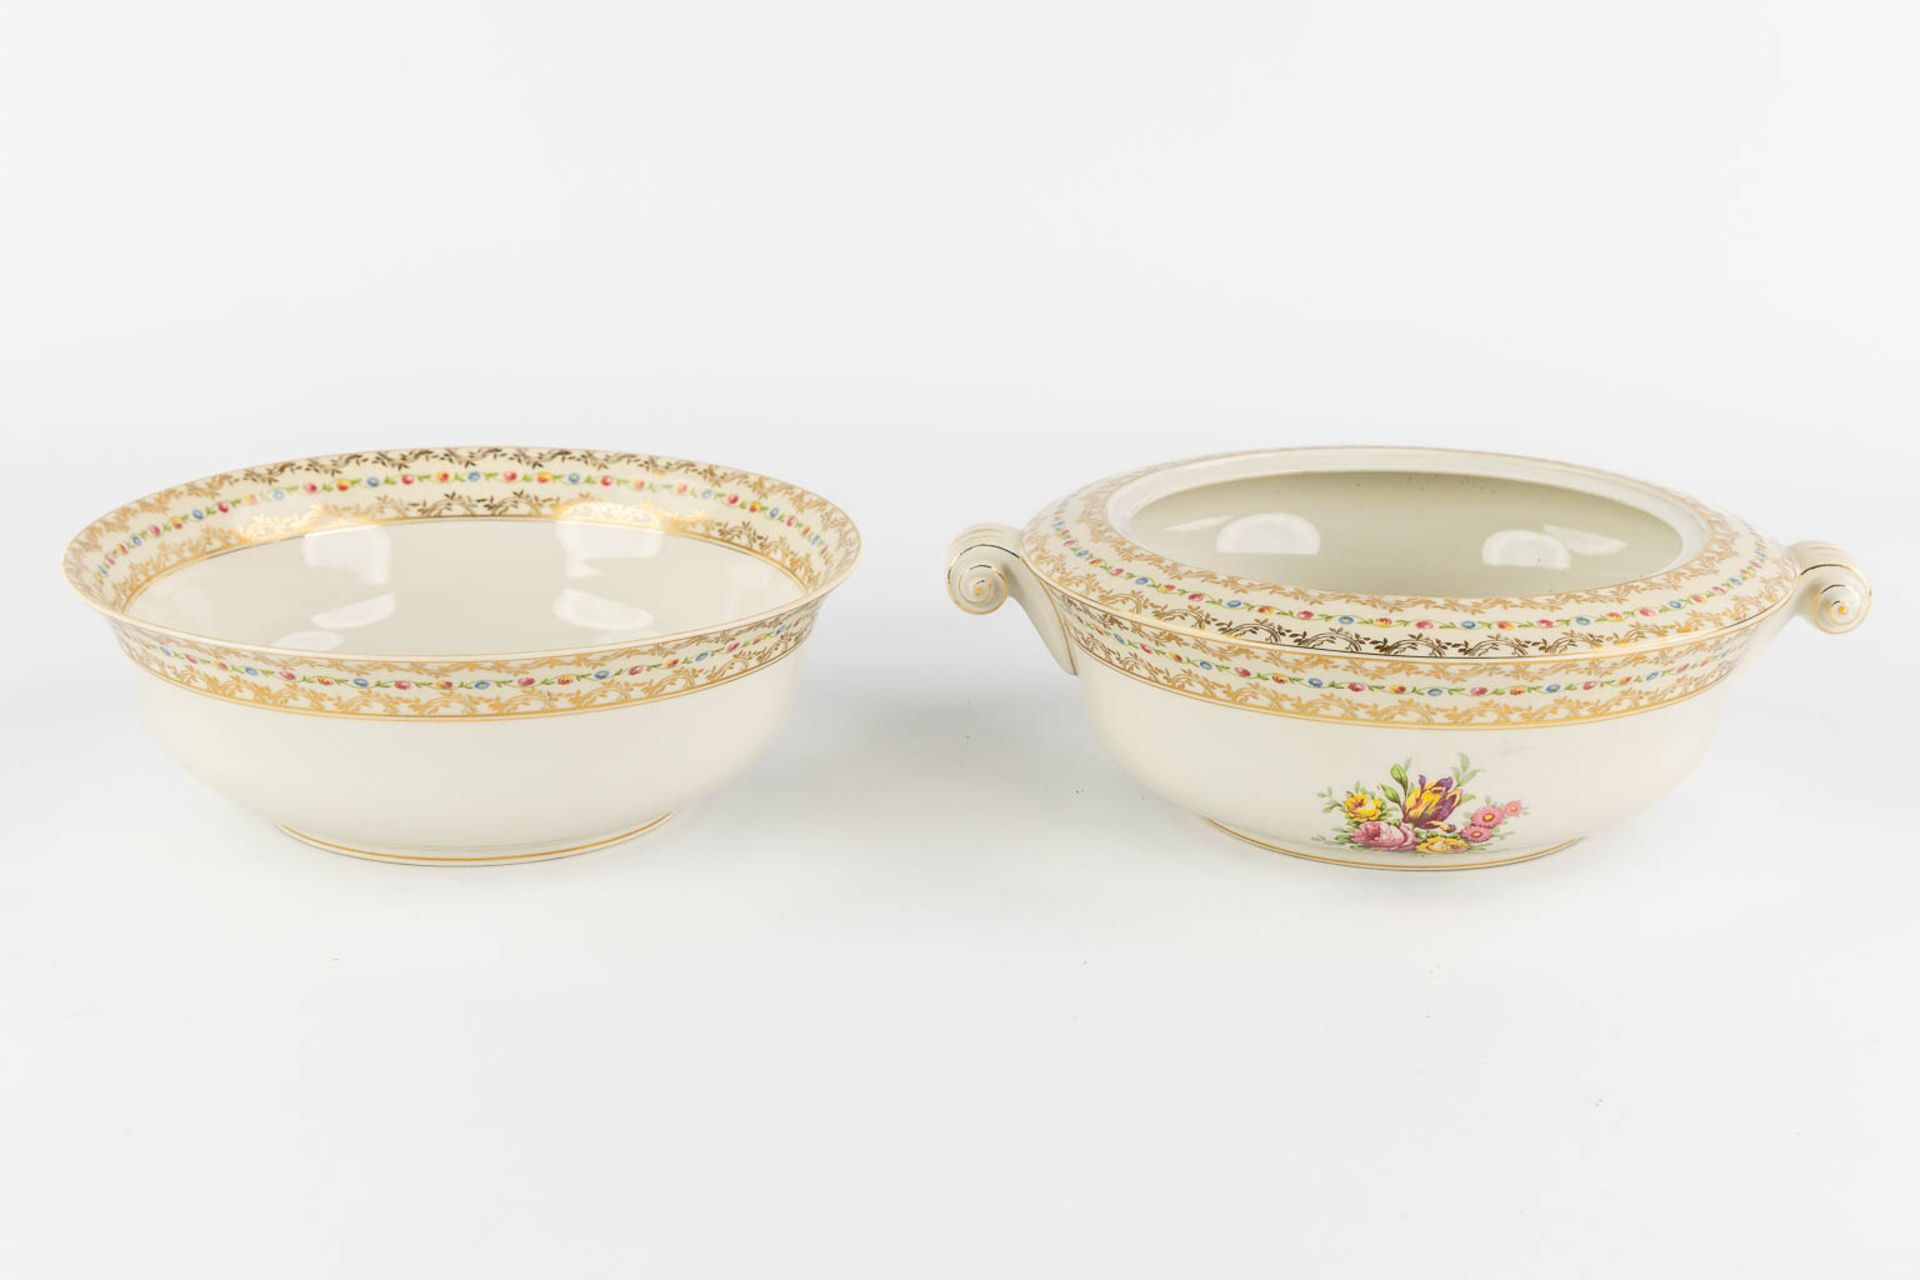 Raynaud, Limoges, a large dinner service. (L:25 x W:35 cm) - Image 14 of 16